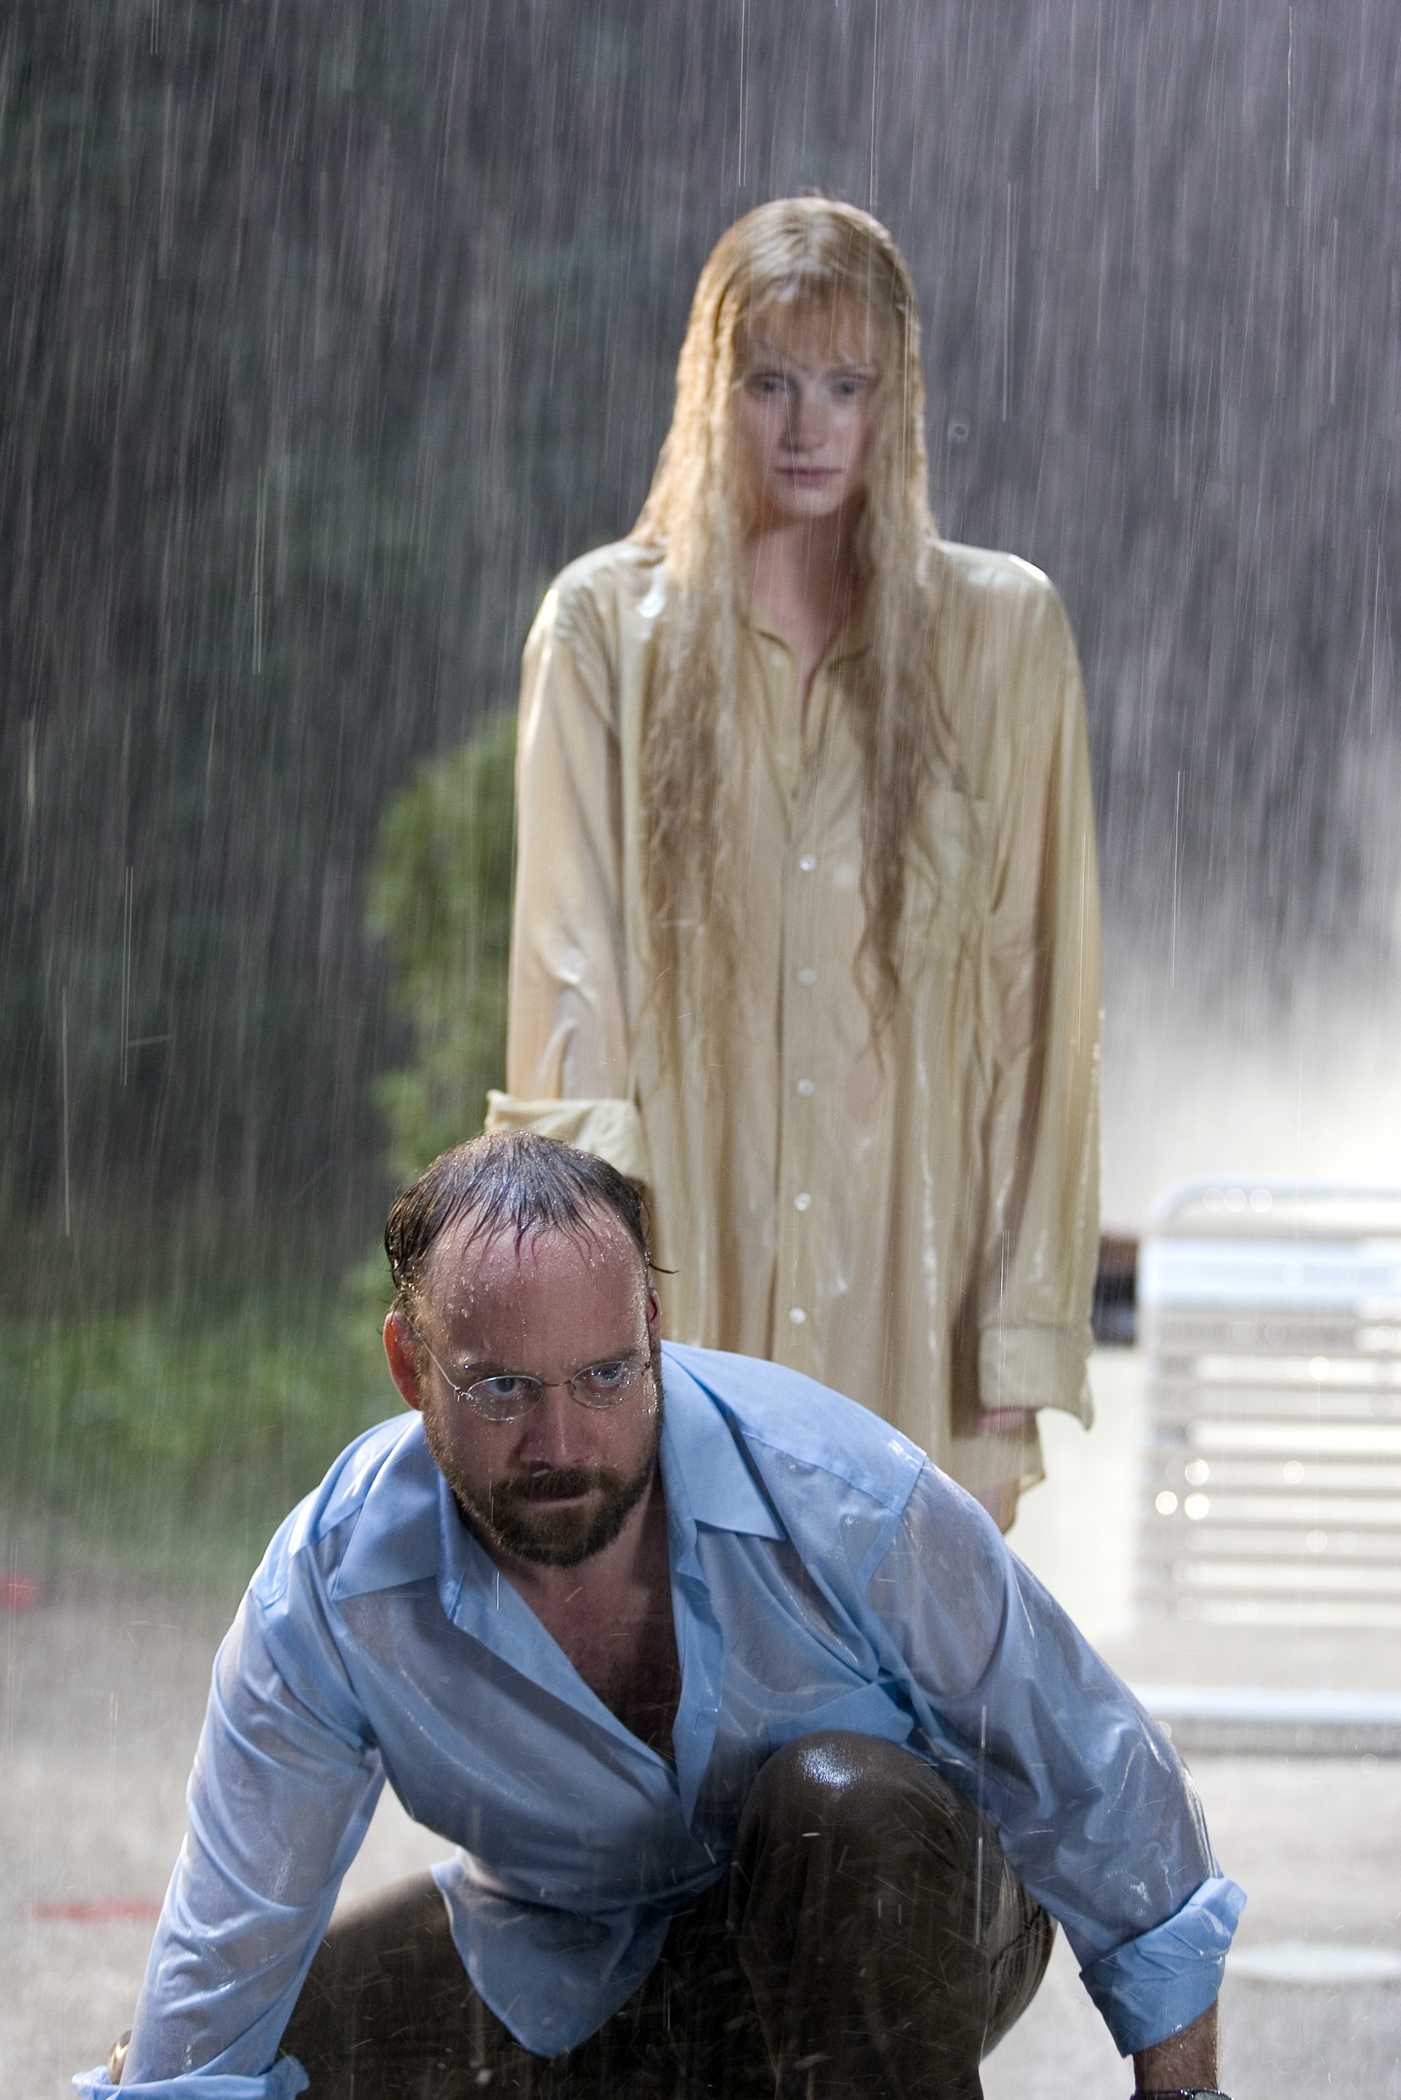 PAUL GIAMATTI as Cleveland Heep and BRYCE DALLAS HOWARD as Story star in Warner Bros. Pictures' sci-fi fantasy suspense thriller 